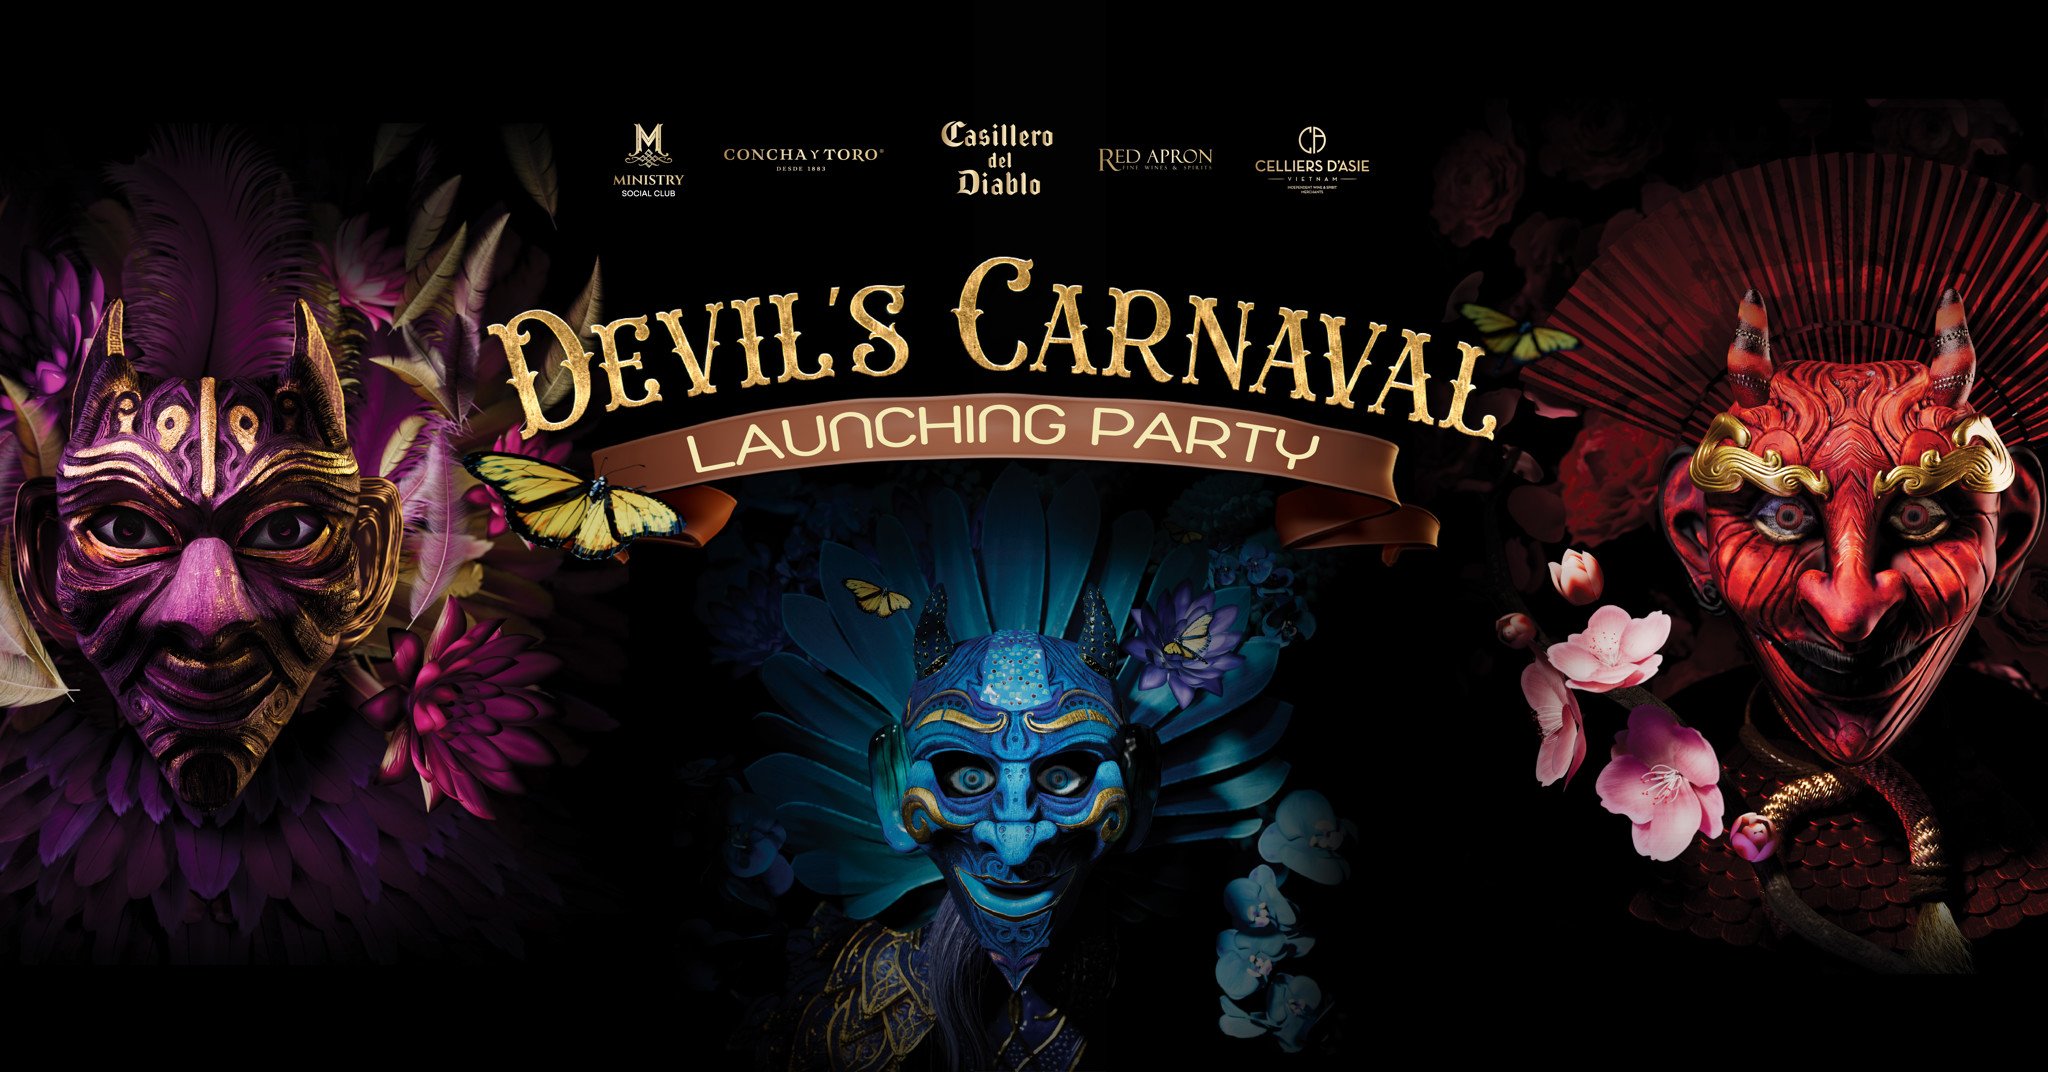 HANOI - DEVIL'S CARNAVAL LAUNCHING PARTY | Ministry - Social Club